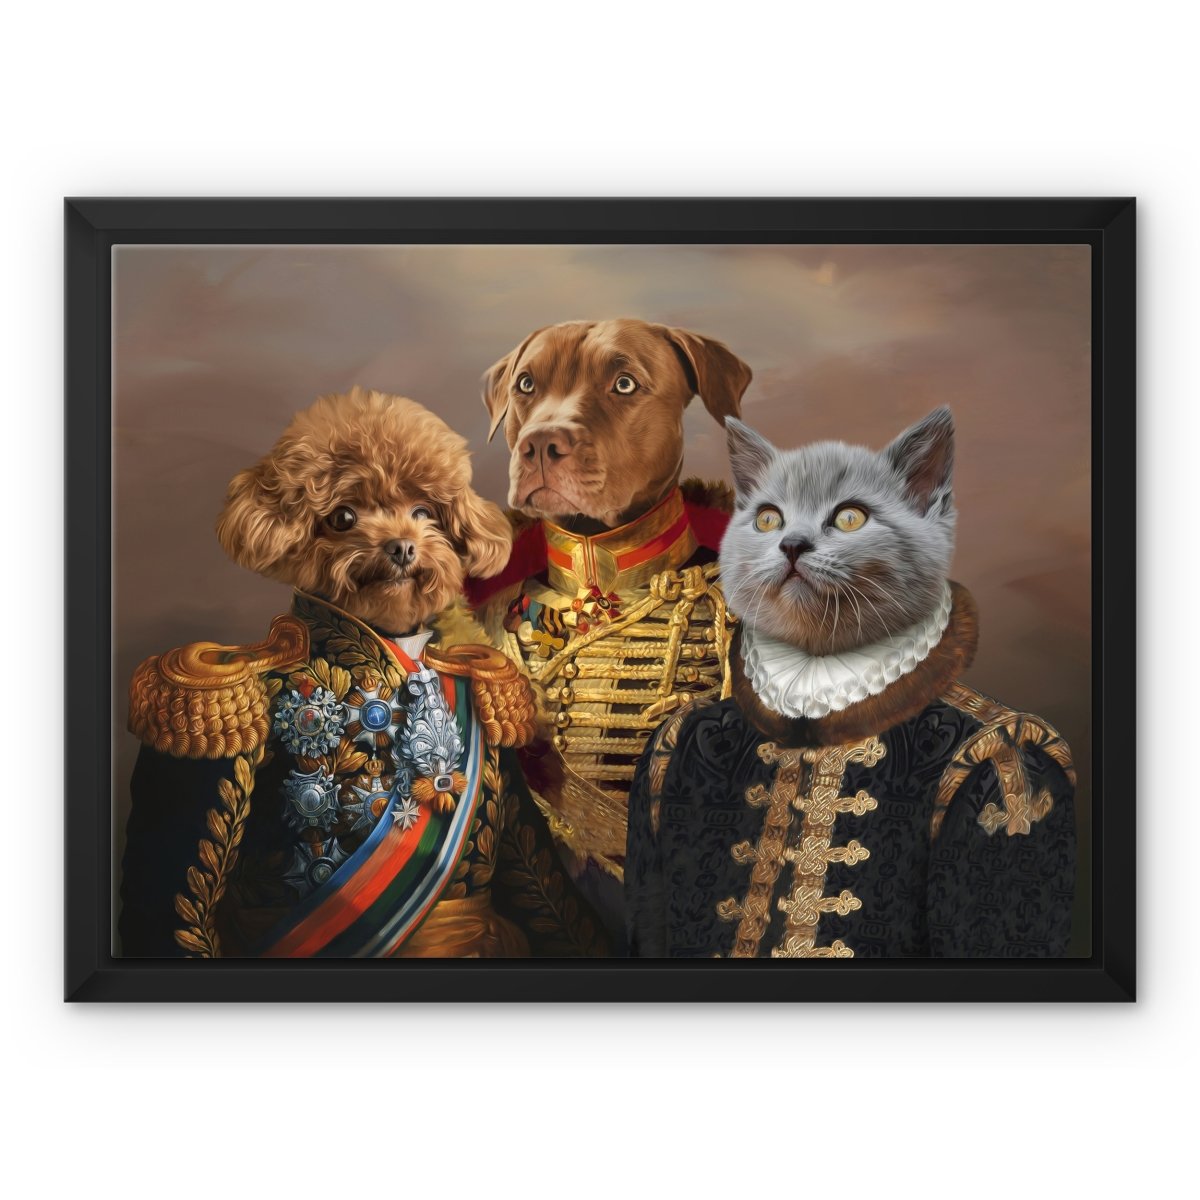 The 3 Brothers In Arms: Custom Pet Canvas - Paw & Glory - #pet portraits# - #dog portraits# - #pet portraits uk#paw and glory, custom pet portrait canvas,dog portrait canvas, dog canvas art, personalised cat canvas, pet canvas print, dog canvas custom